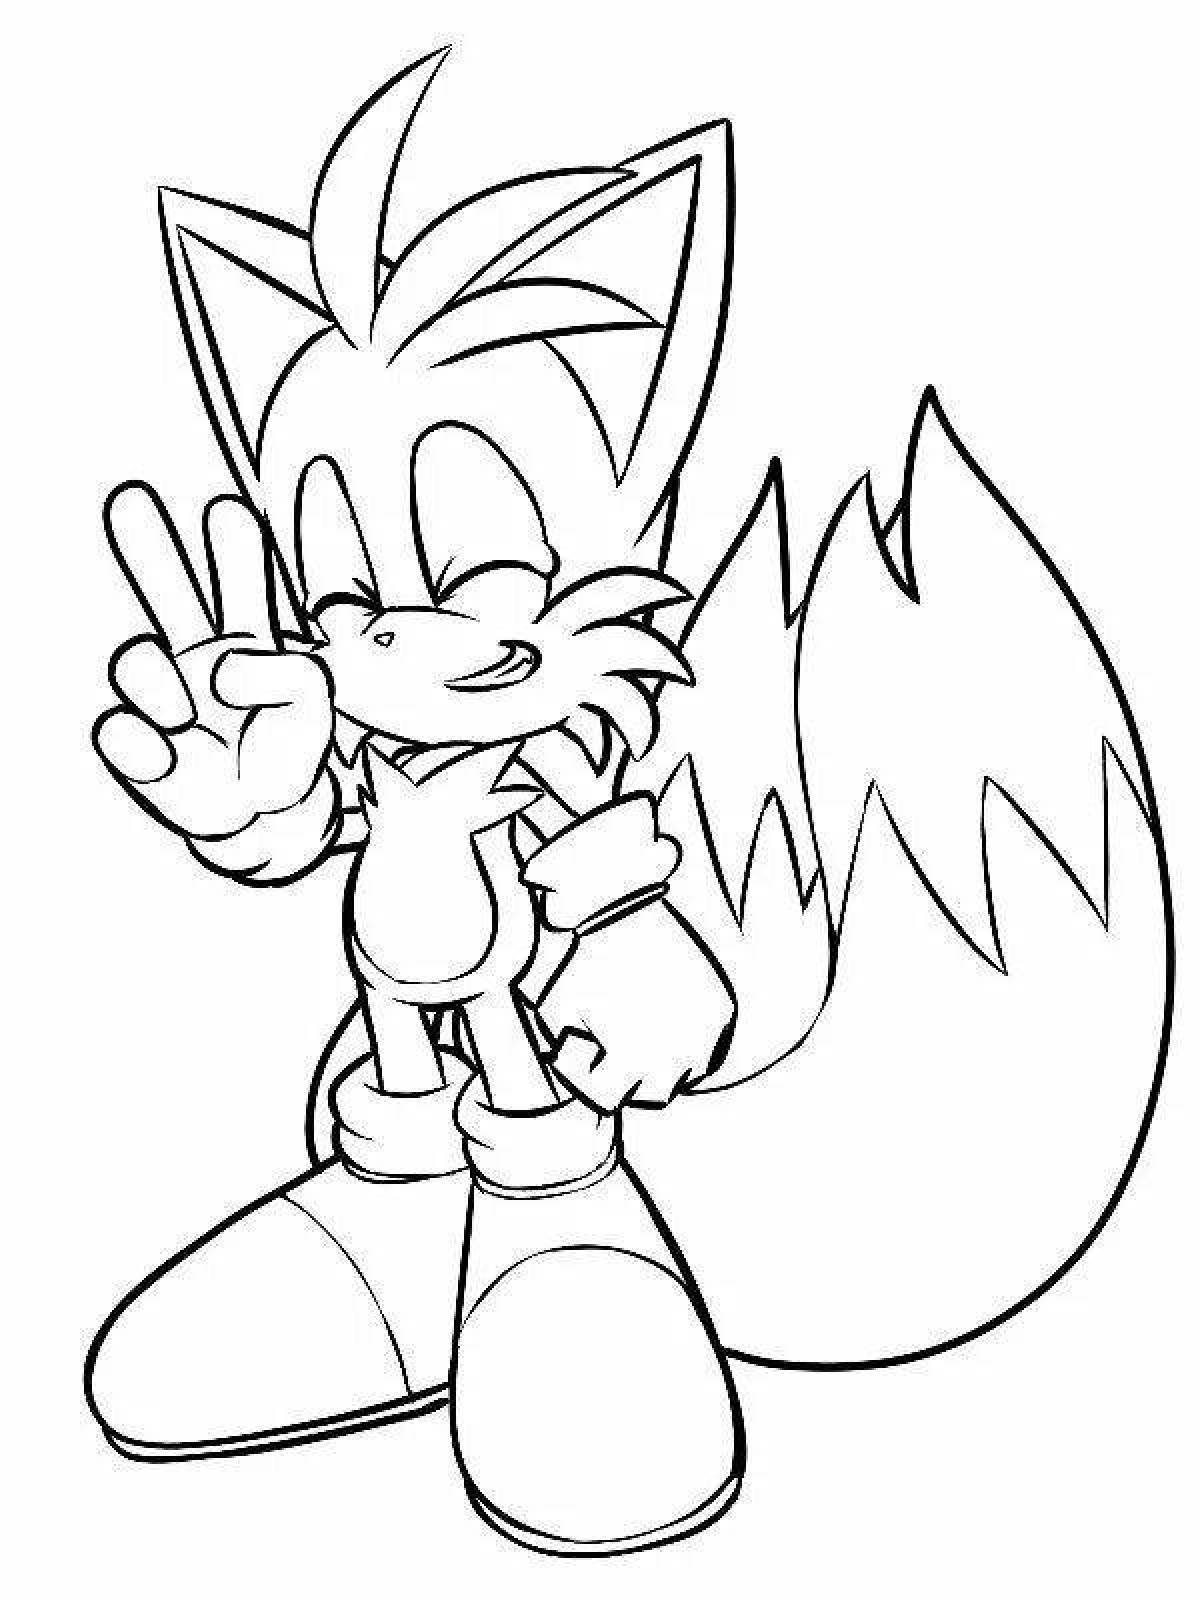 Charming sonic xz coloring book